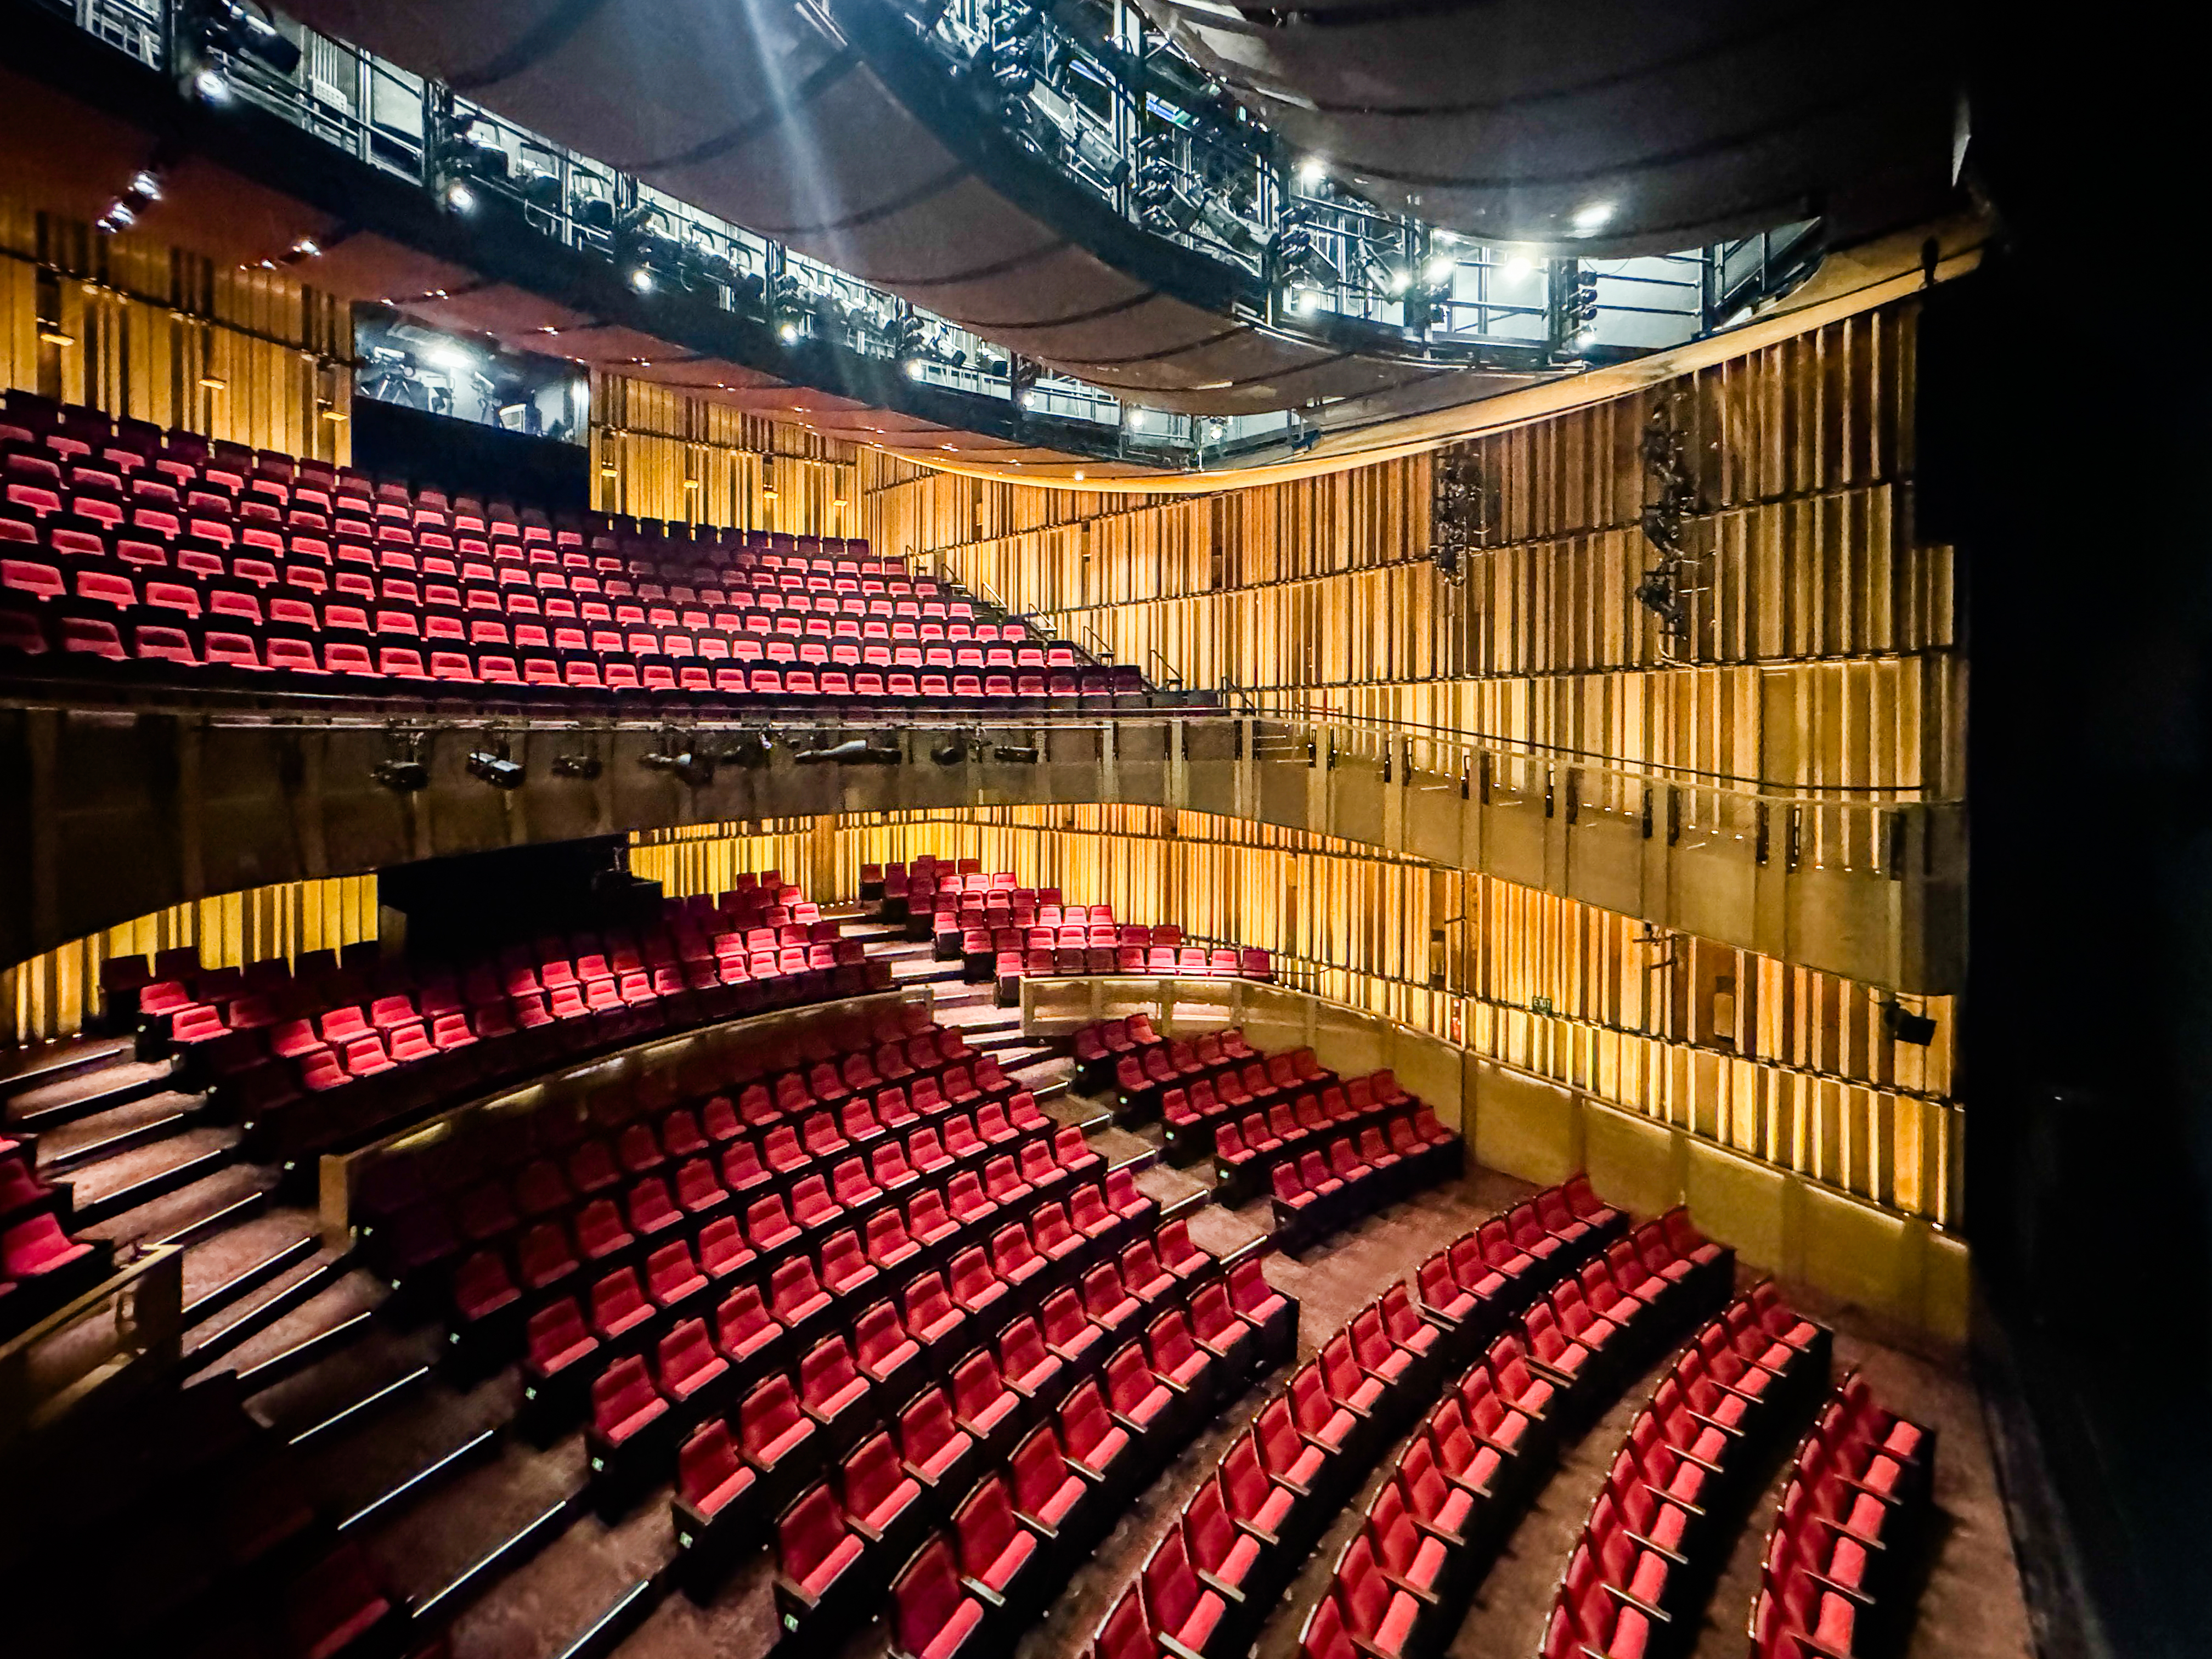 Wide view of Victoria Theatre and Concert Hall’s seating arrangement